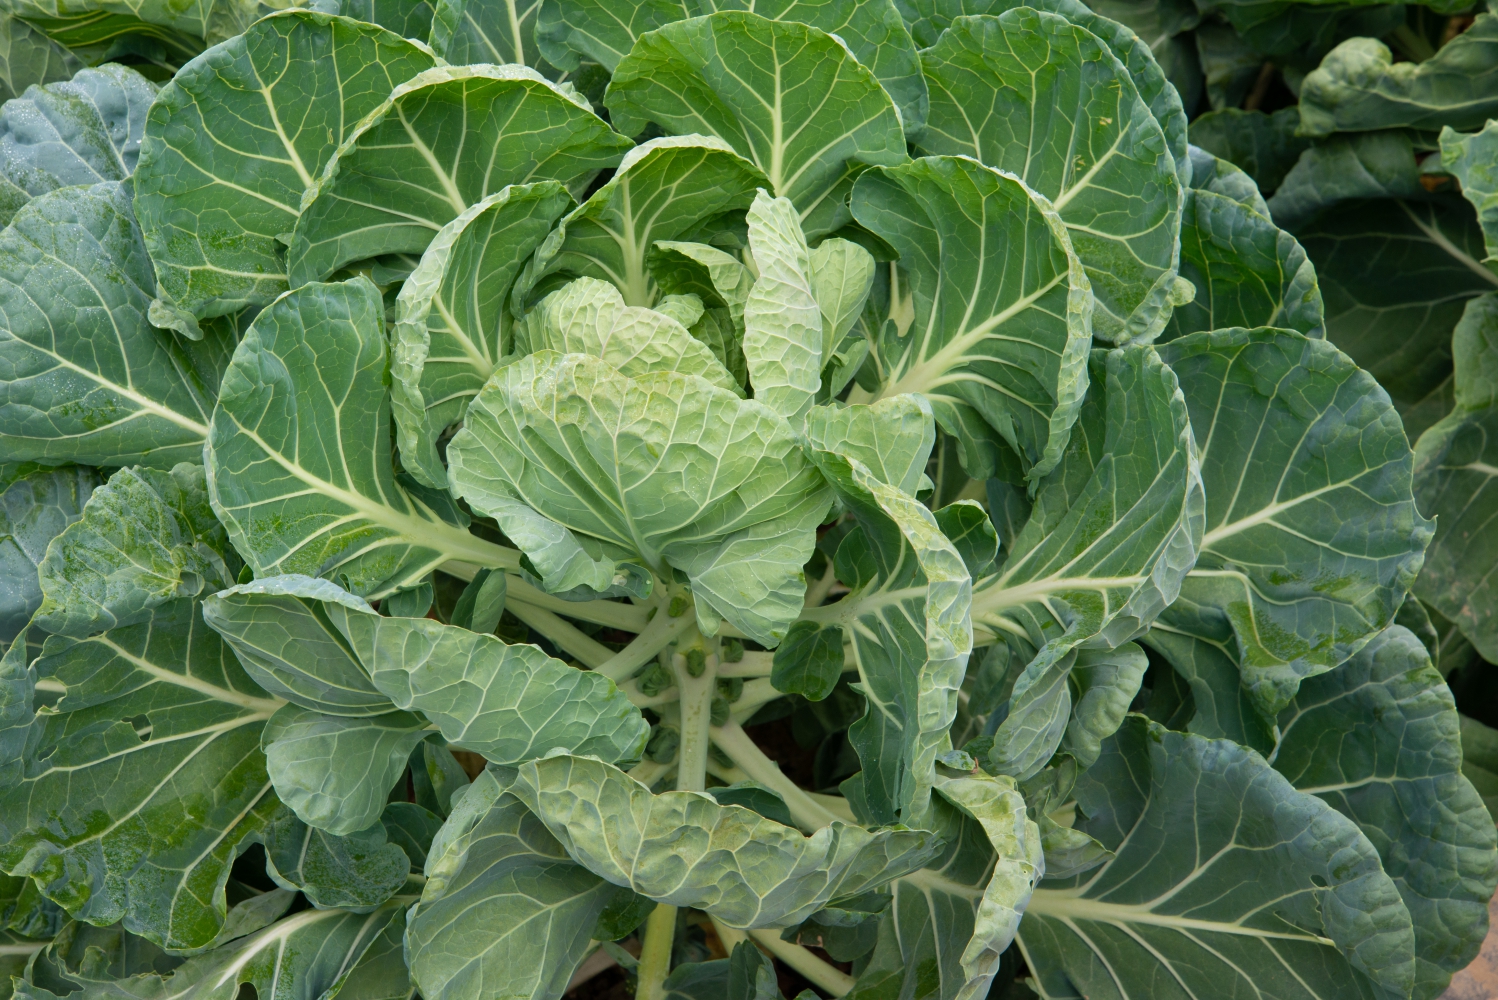 Close-up of brussels sprouts in field.